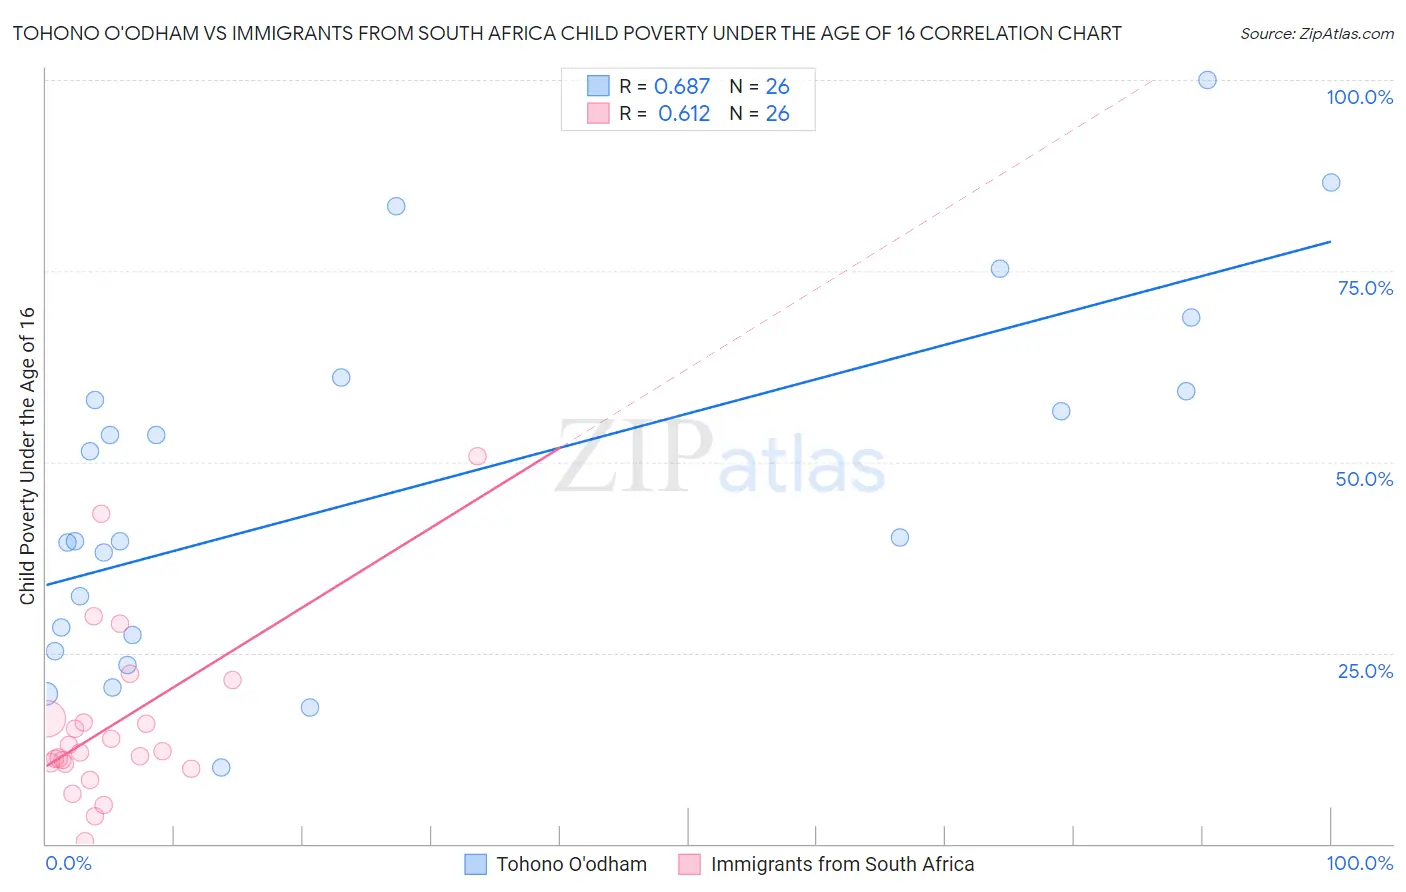 Tohono O'odham vs Immigrants from South Africa Child Poverty Under the Age of 16